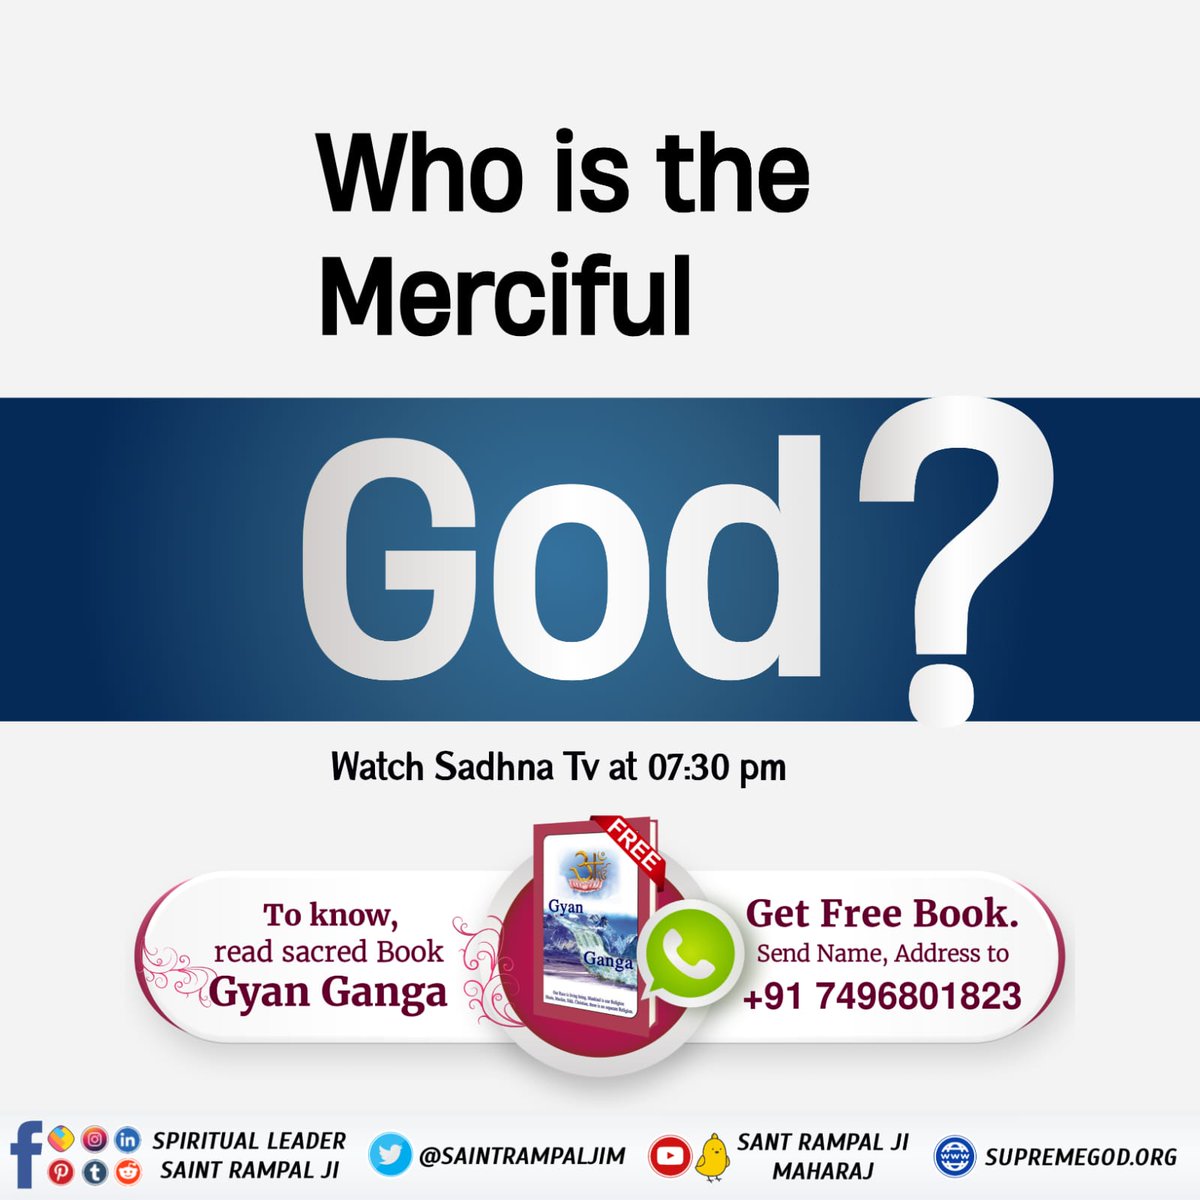 #GodMorningFriday
Who is the merciful God?
To know more read the previous book 'Gyan Ganga''
Visit Saint Rampal Ji Maharaj YouTube Channel for More Information
#FridayMotivation